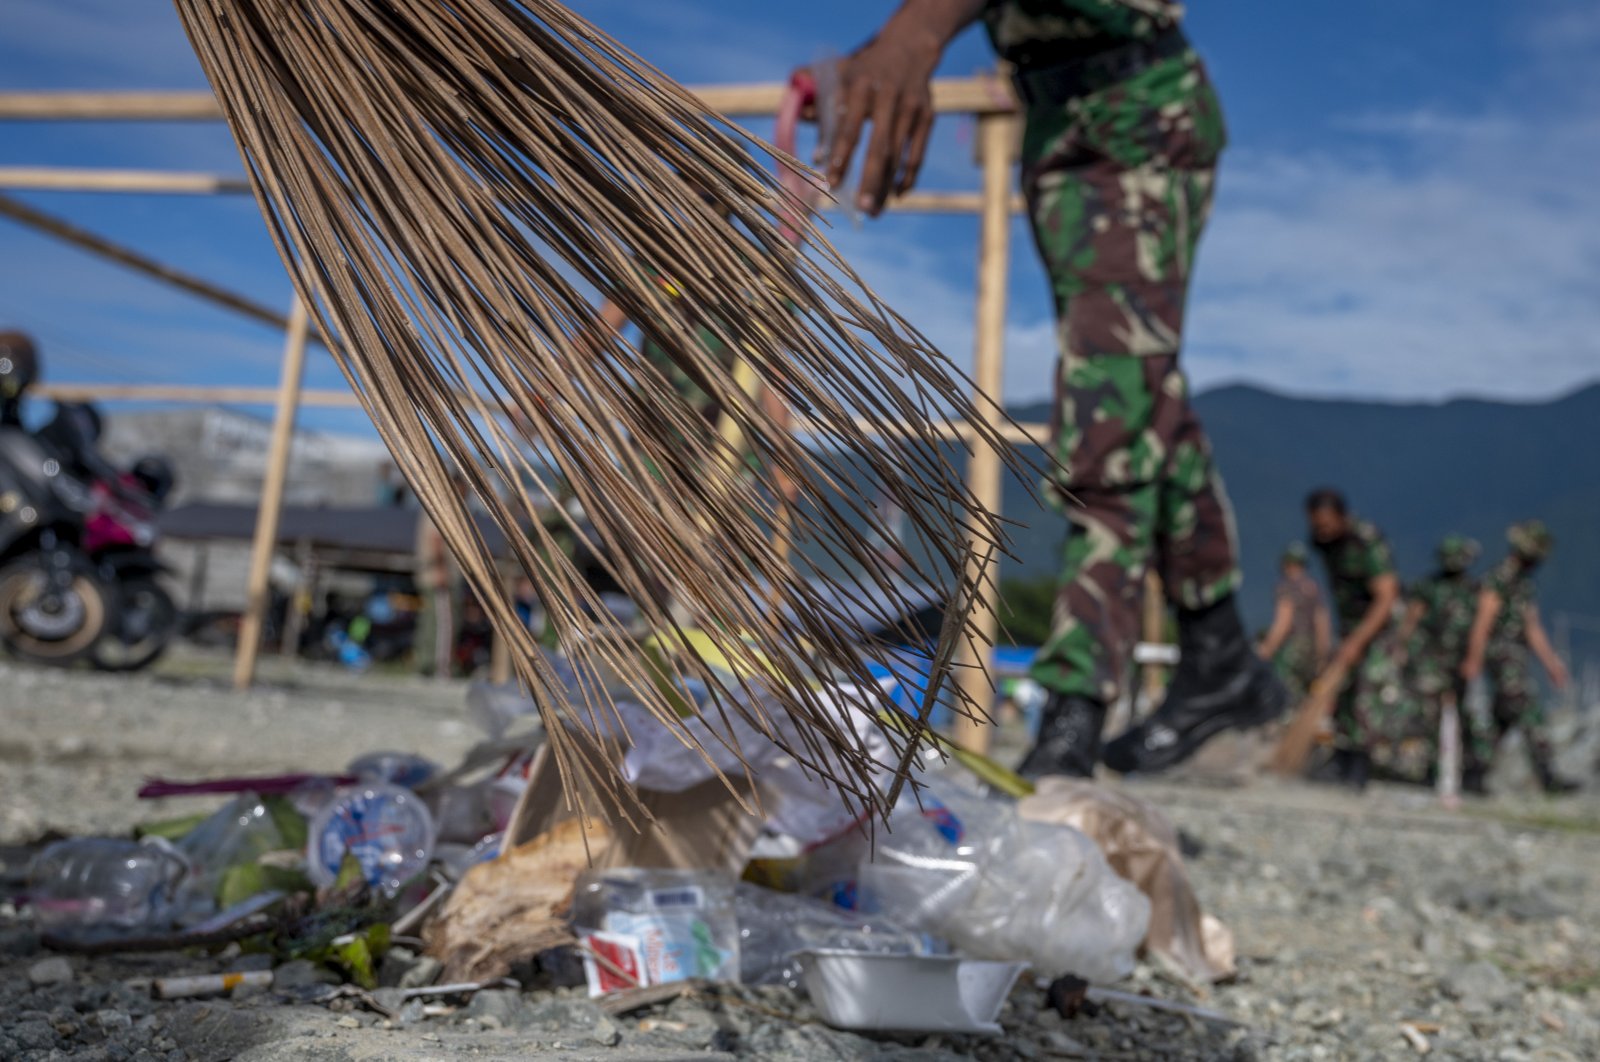 Indonesian soldiers pick up plastic waste scattered in the Talise Beach area, Palu, Central Sulawesi Province, Indonesia on July 23, 2021. (NurPhoto via Getty Images)